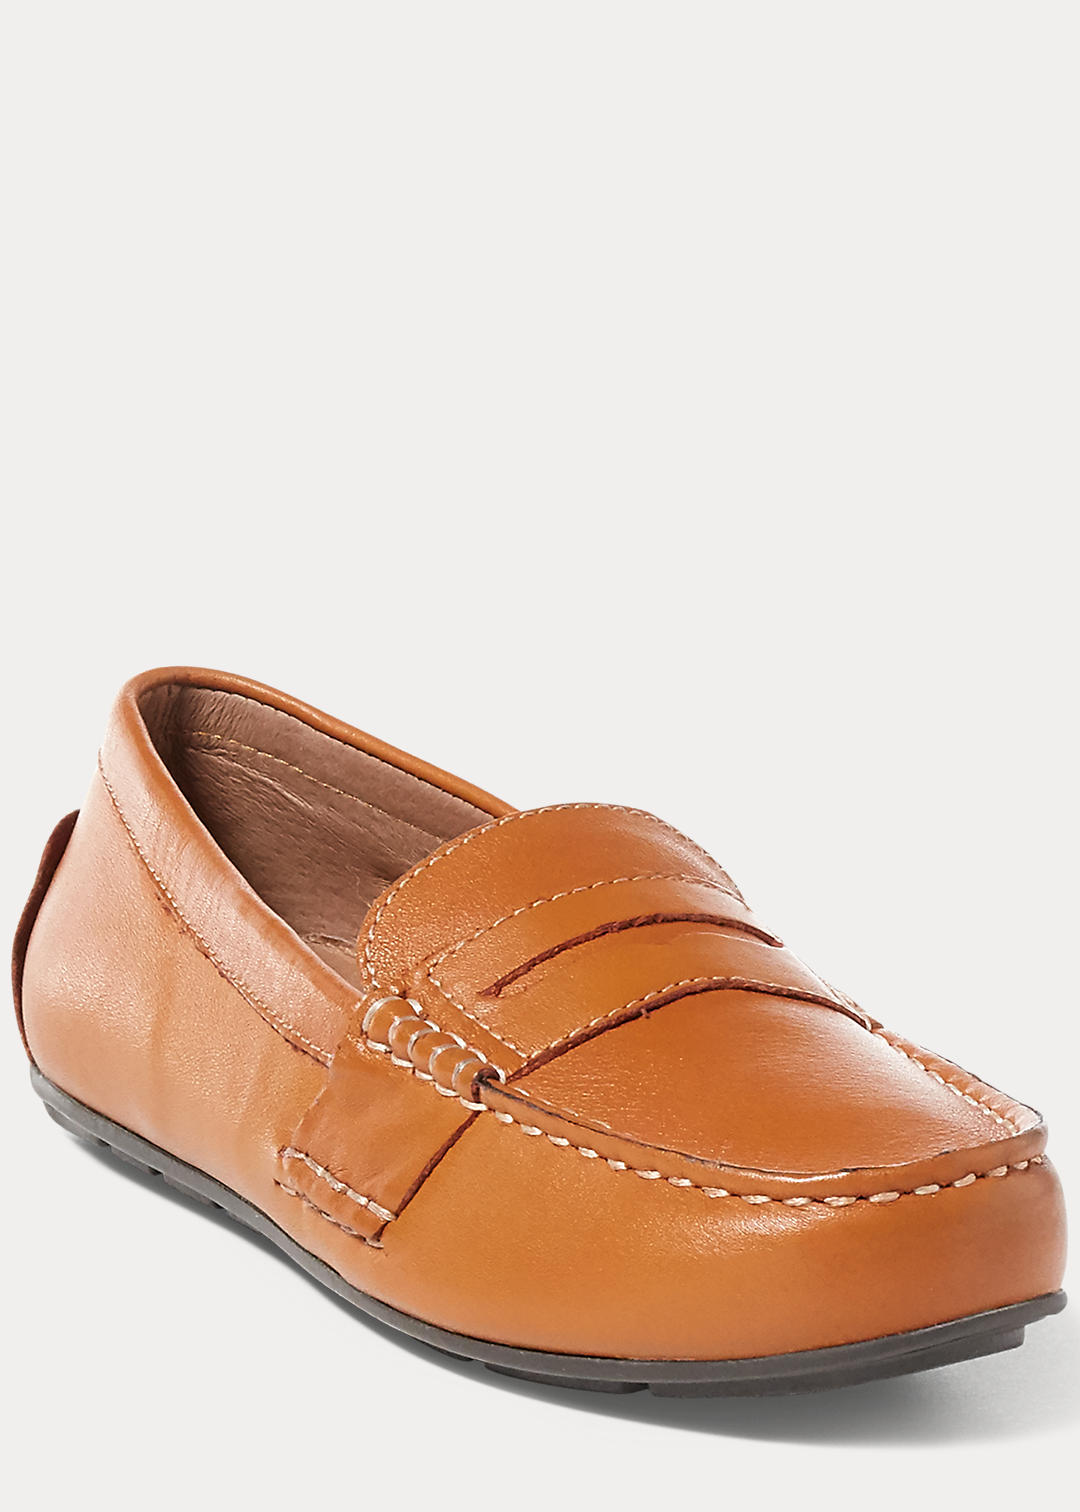 Junior Telly Leather Penny Loafer 2